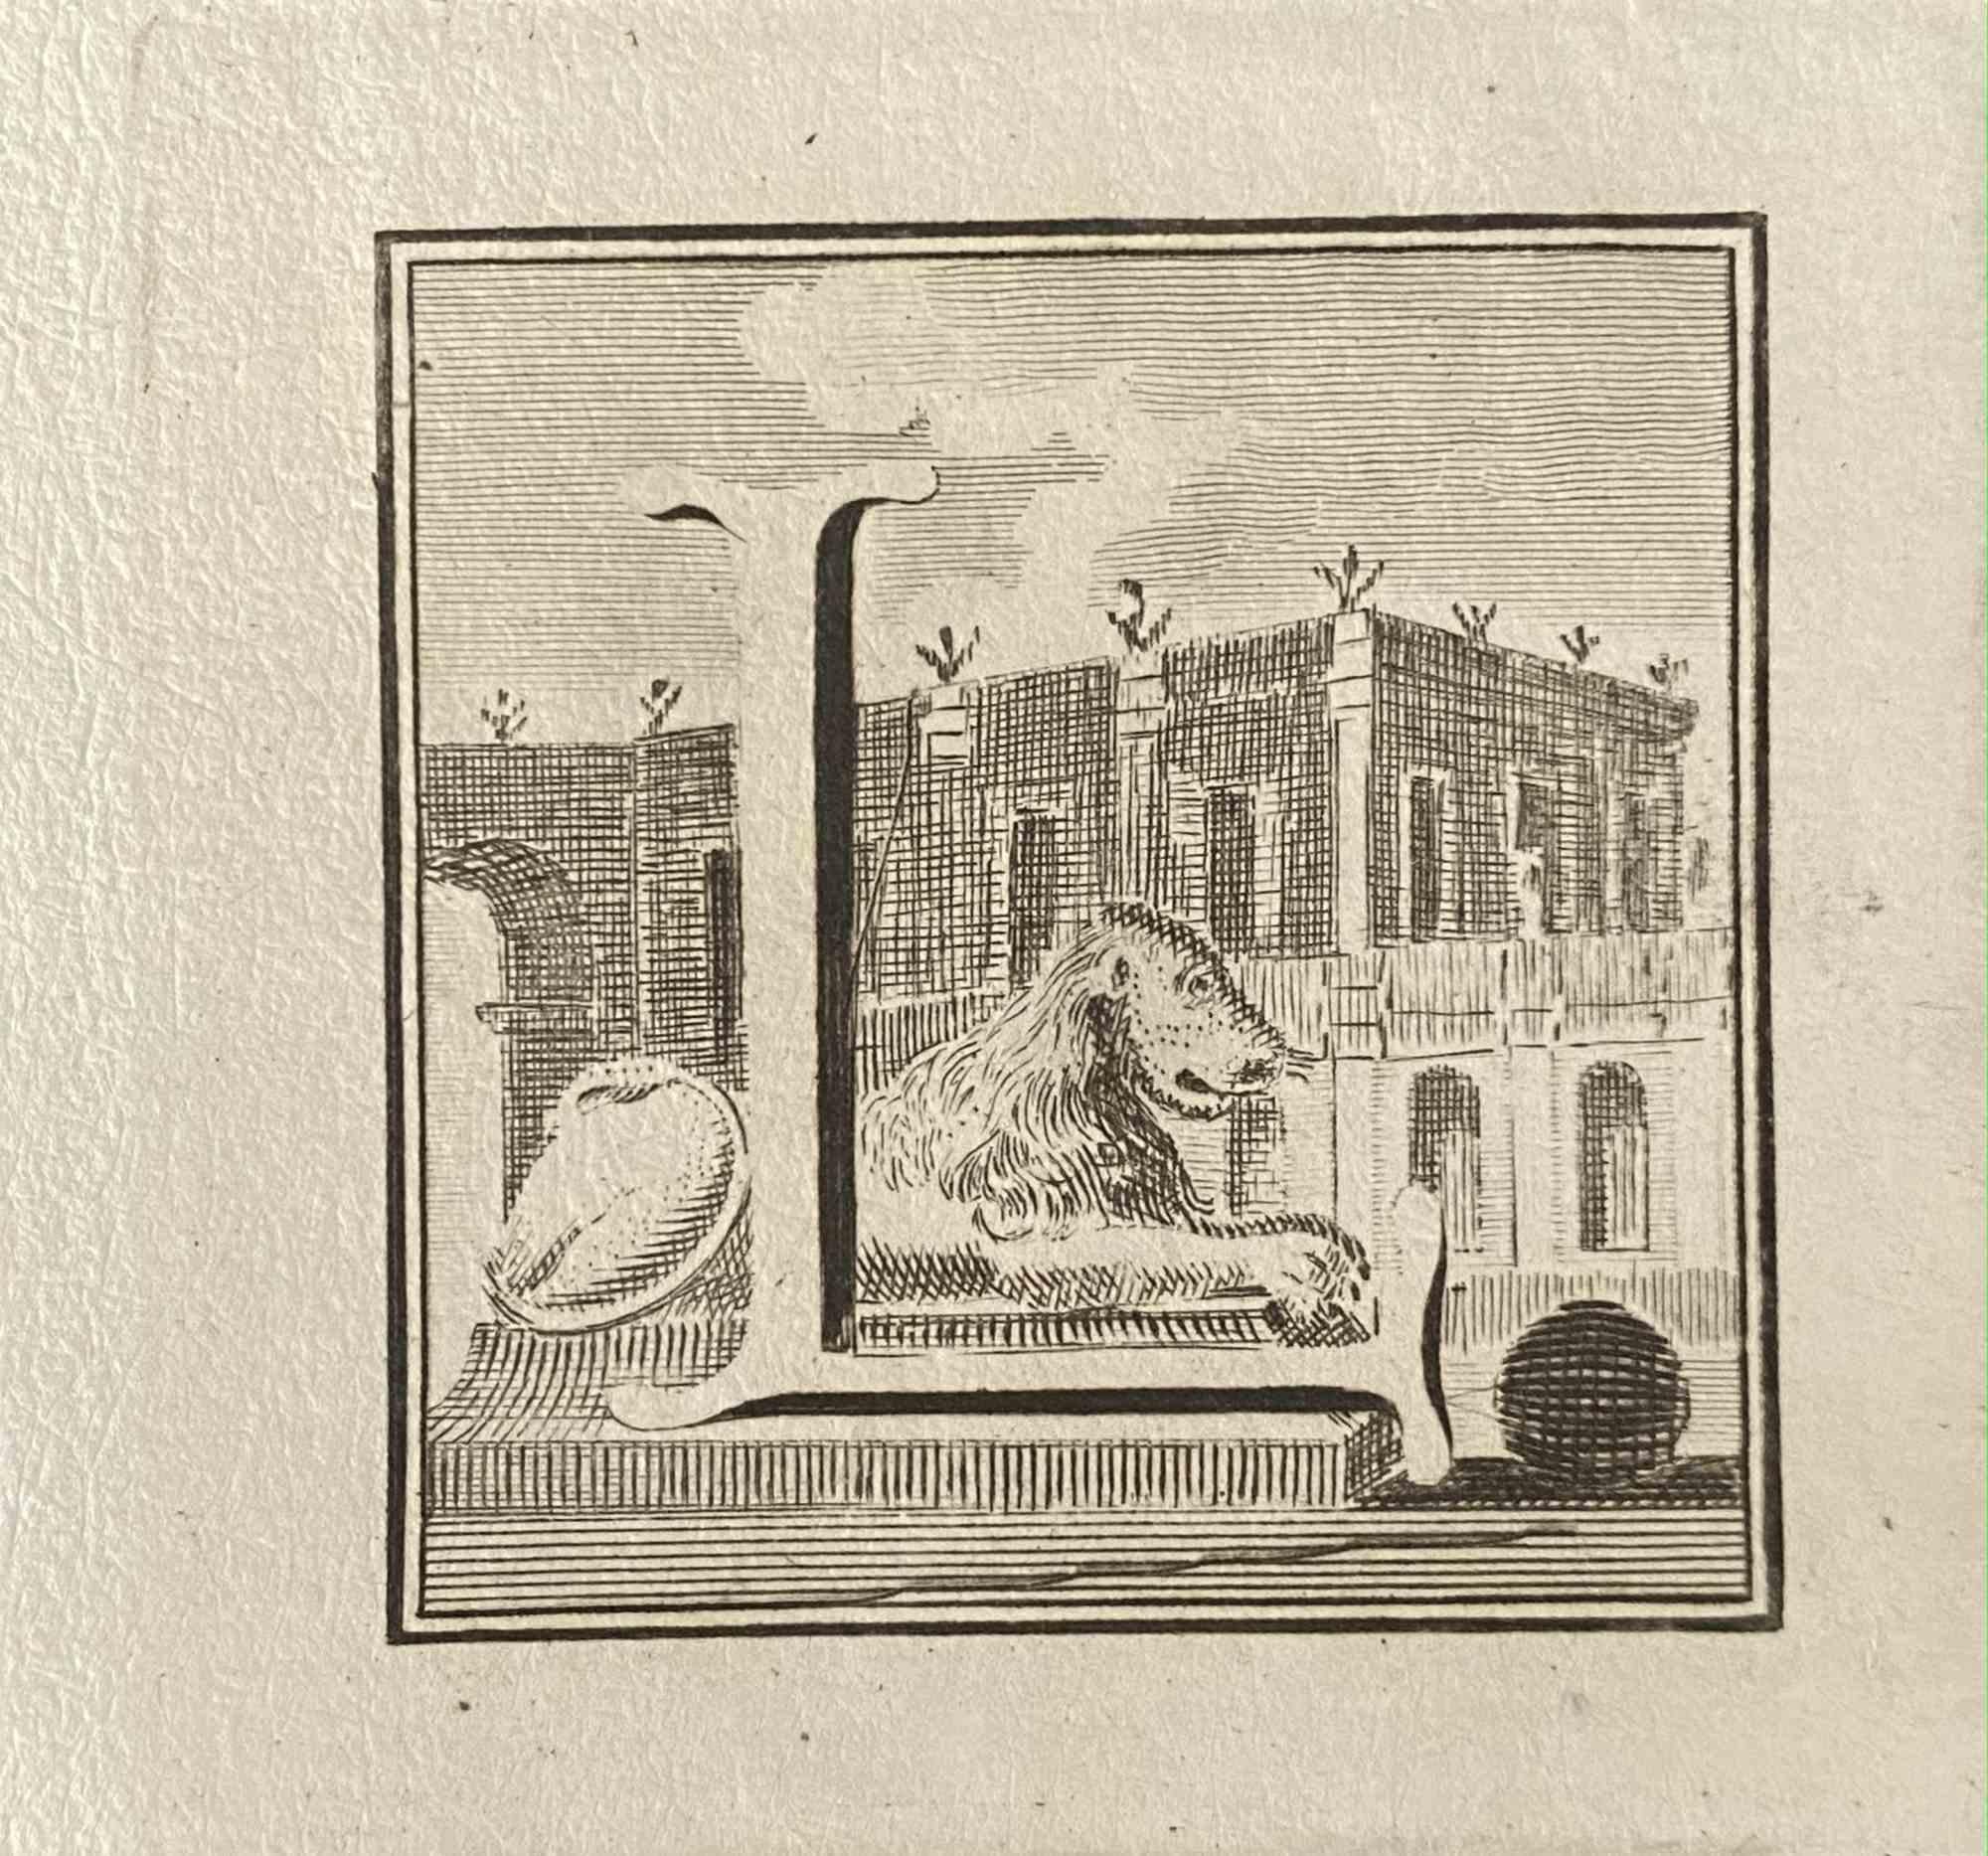 Unknown Figurative Print - Capital Letter from Ancient Rome - Original Etching by Various Masters - 1750s